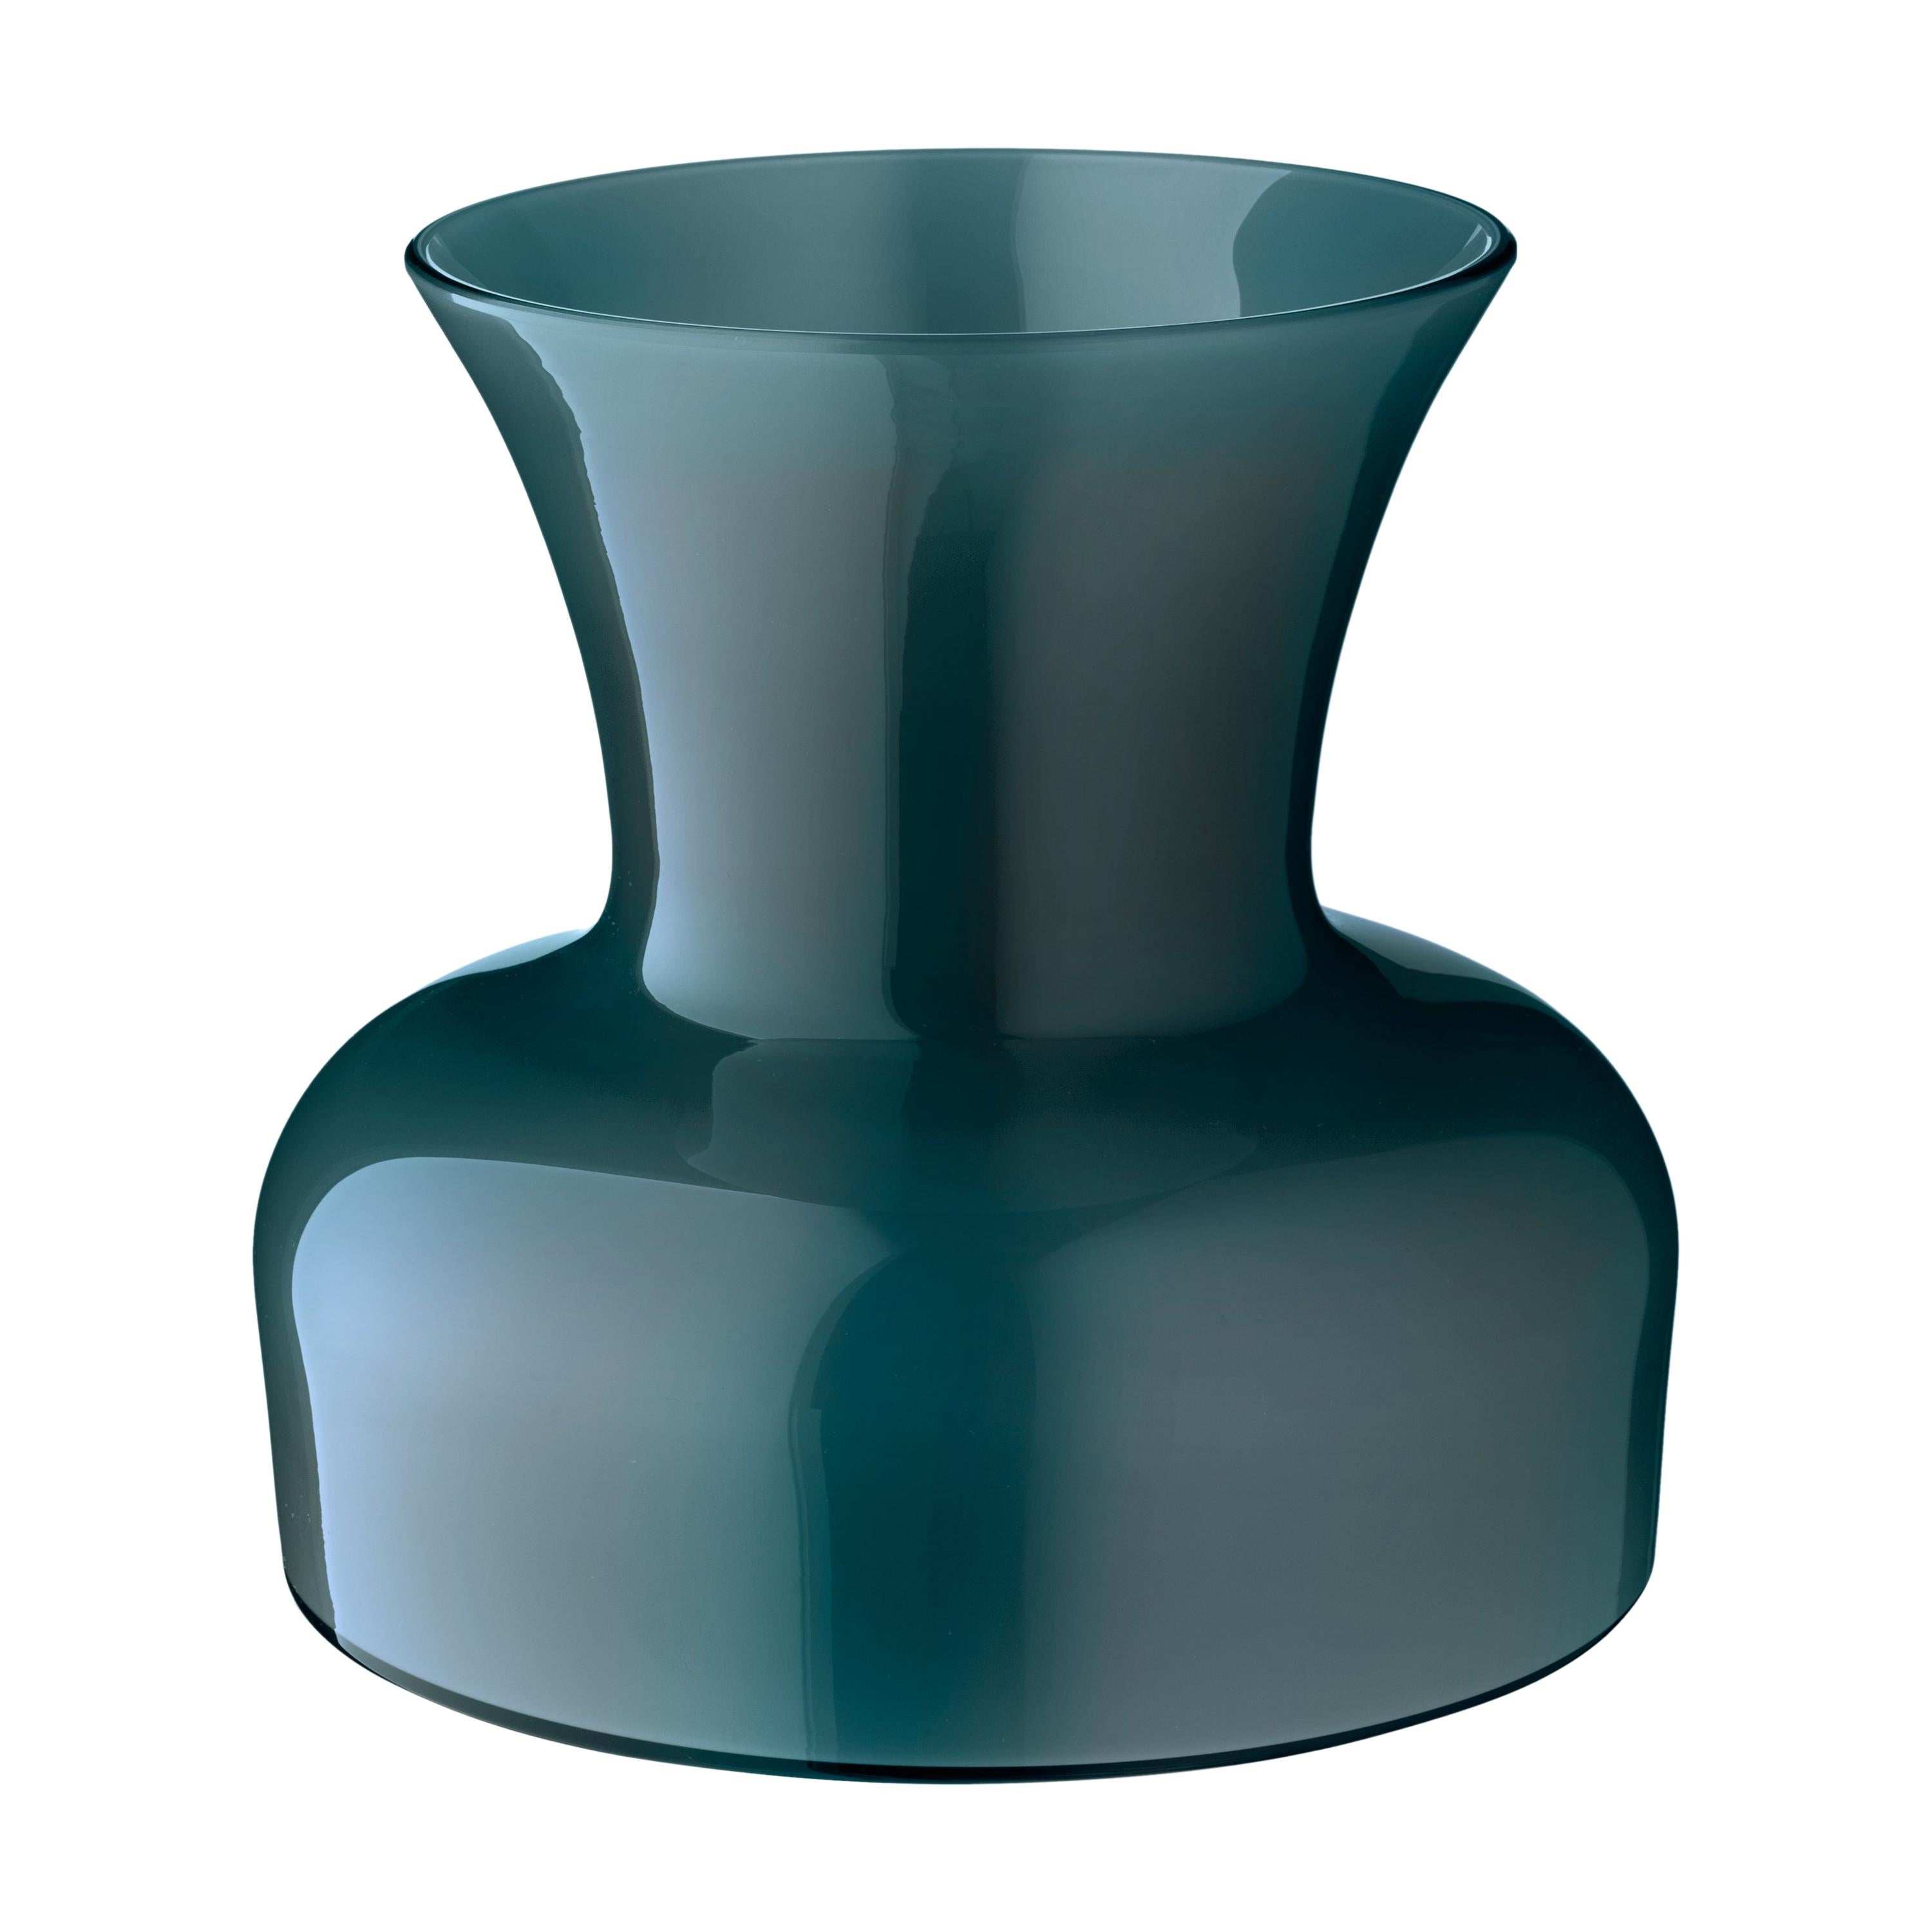 Salviati Large Lily Profili Vase in Peacock Green by Anna Gili For Sale